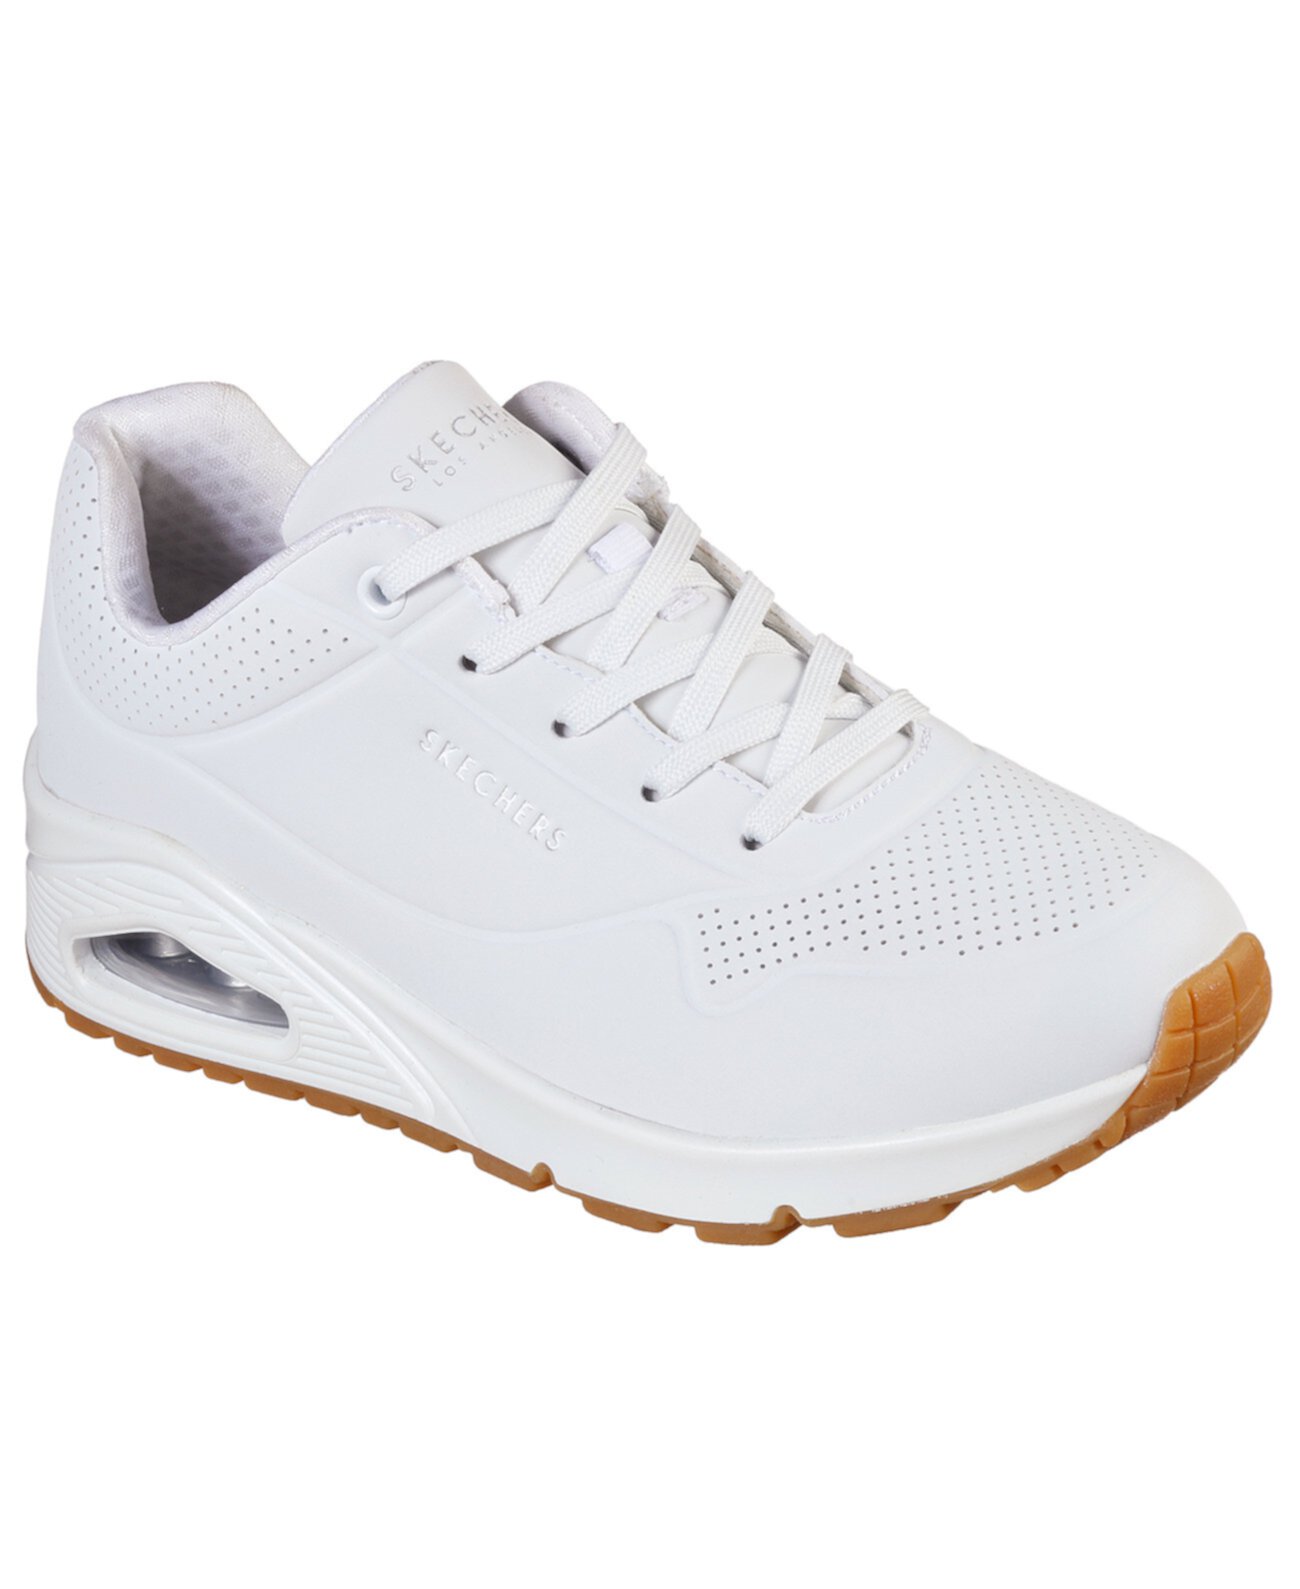 Women's Street Uno - Stand On Air Casual Sneakers from Finish Line SKECHERS